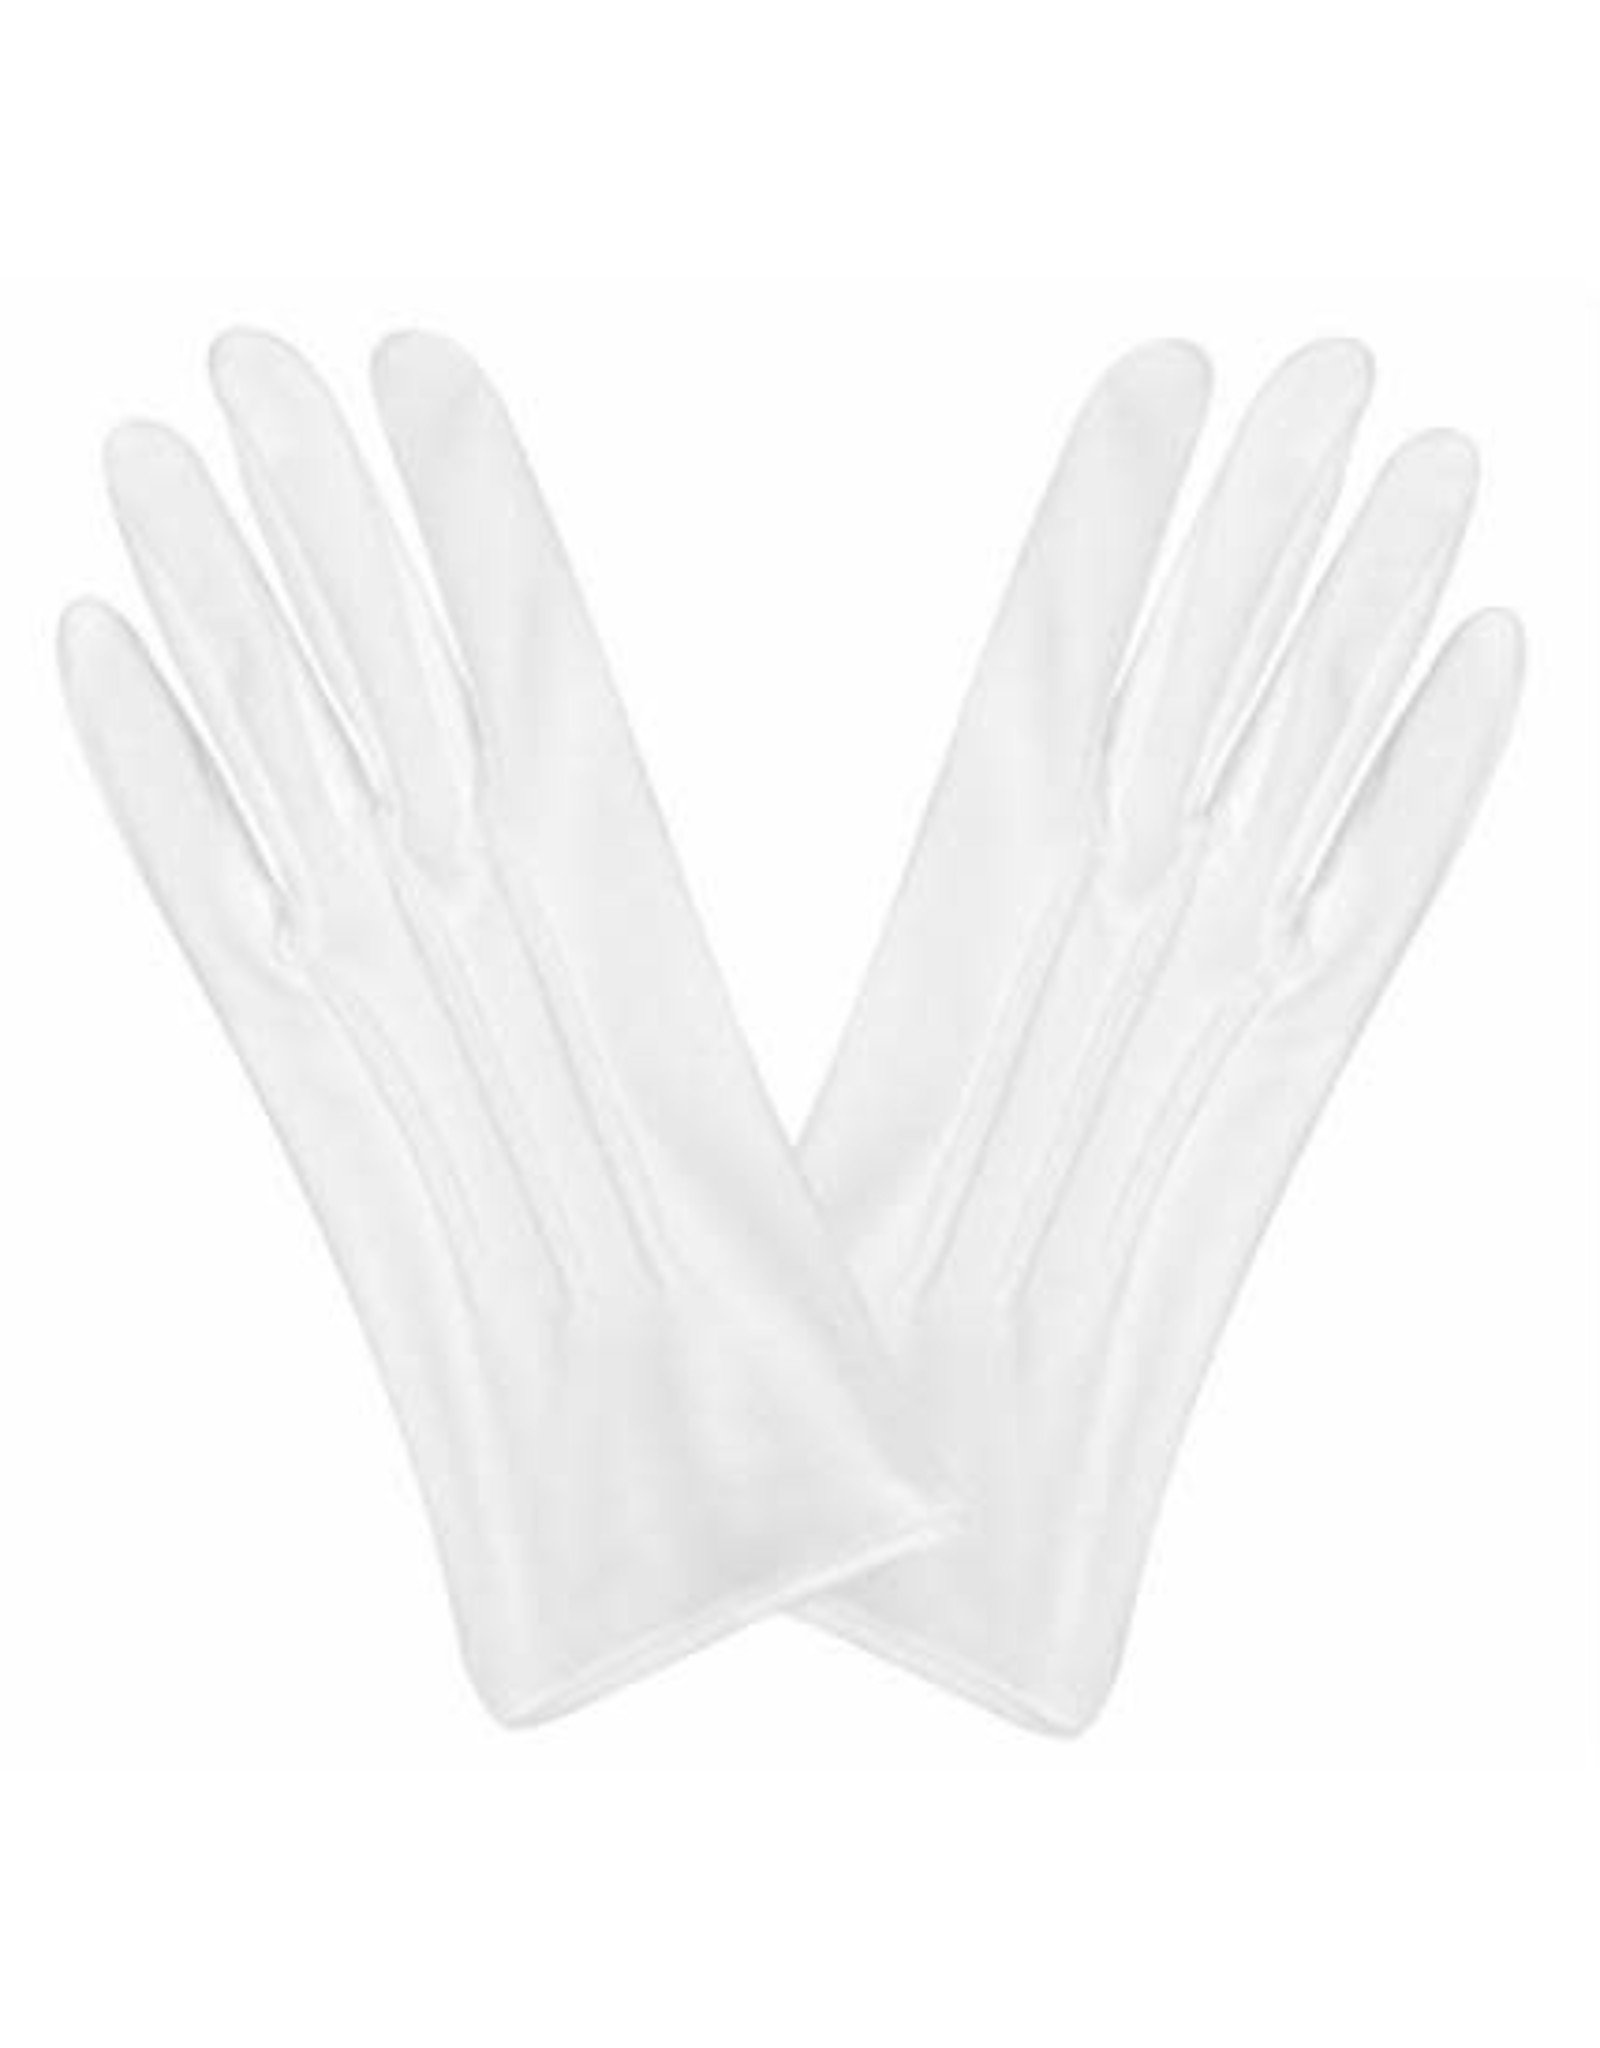 Beistle White Theatrical Gloves with Snap